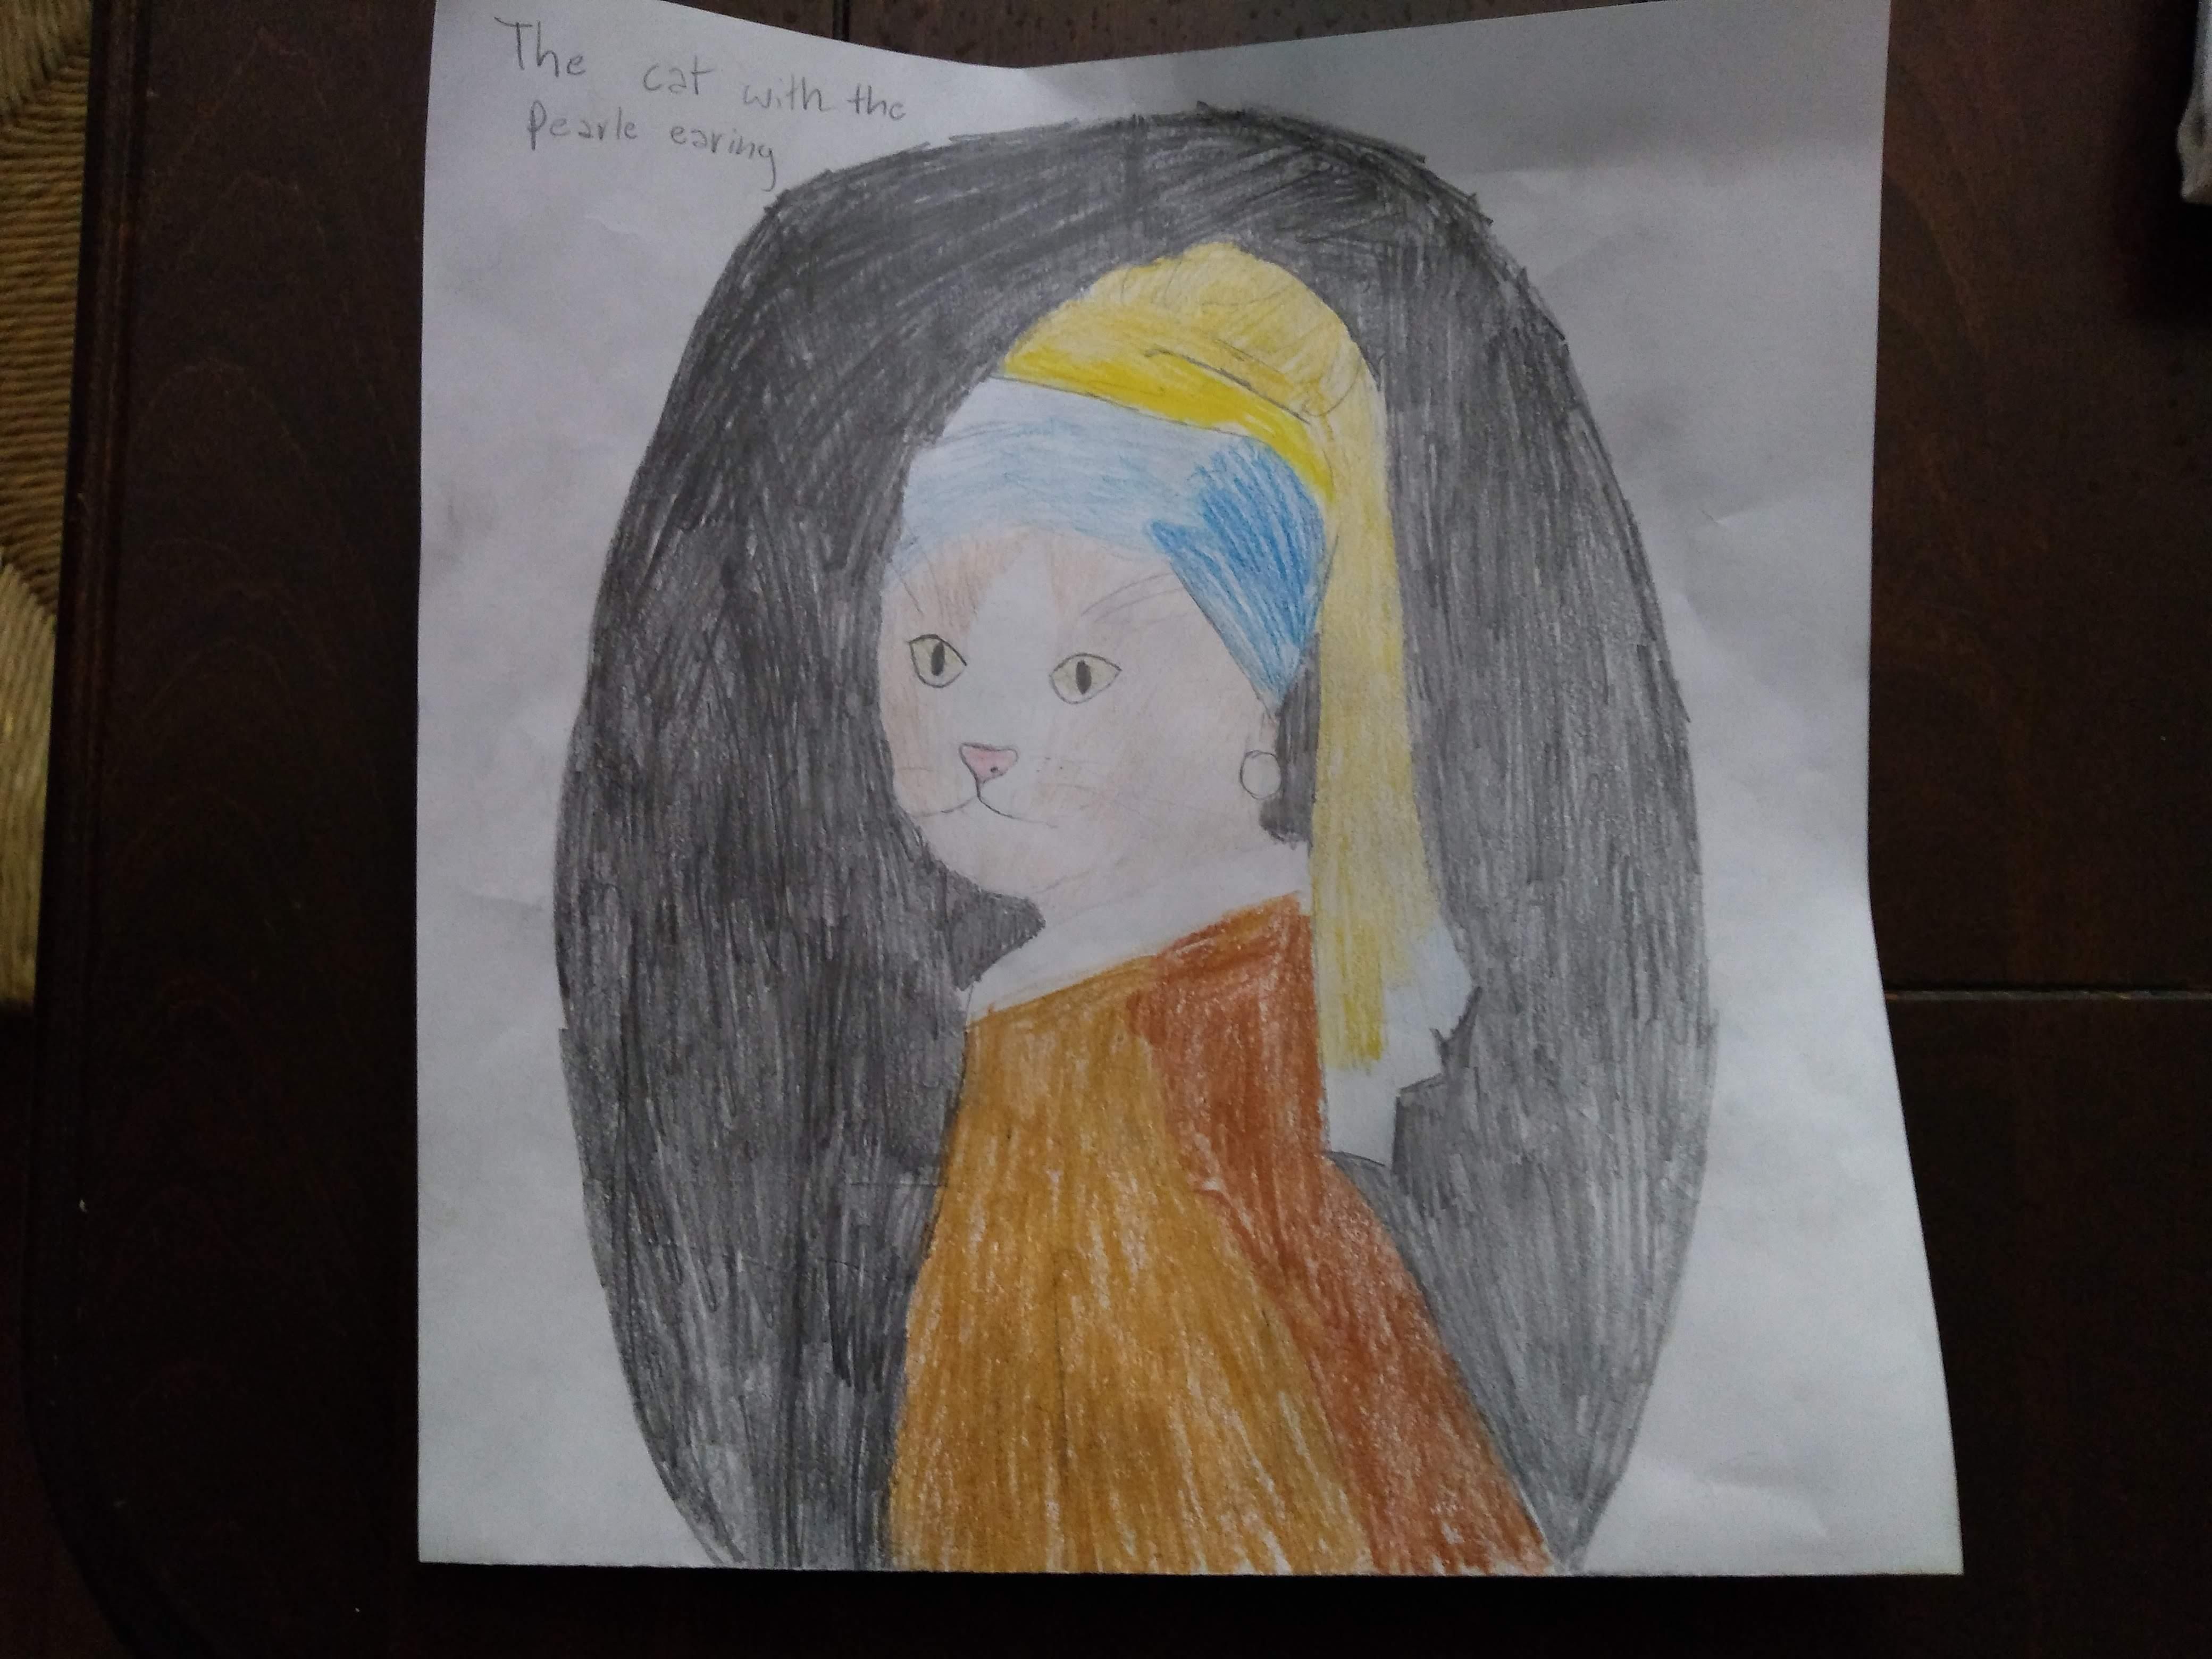 My 10 year old neighbor, Julia, drew this parody. "The Cat with the Pearl Earring."